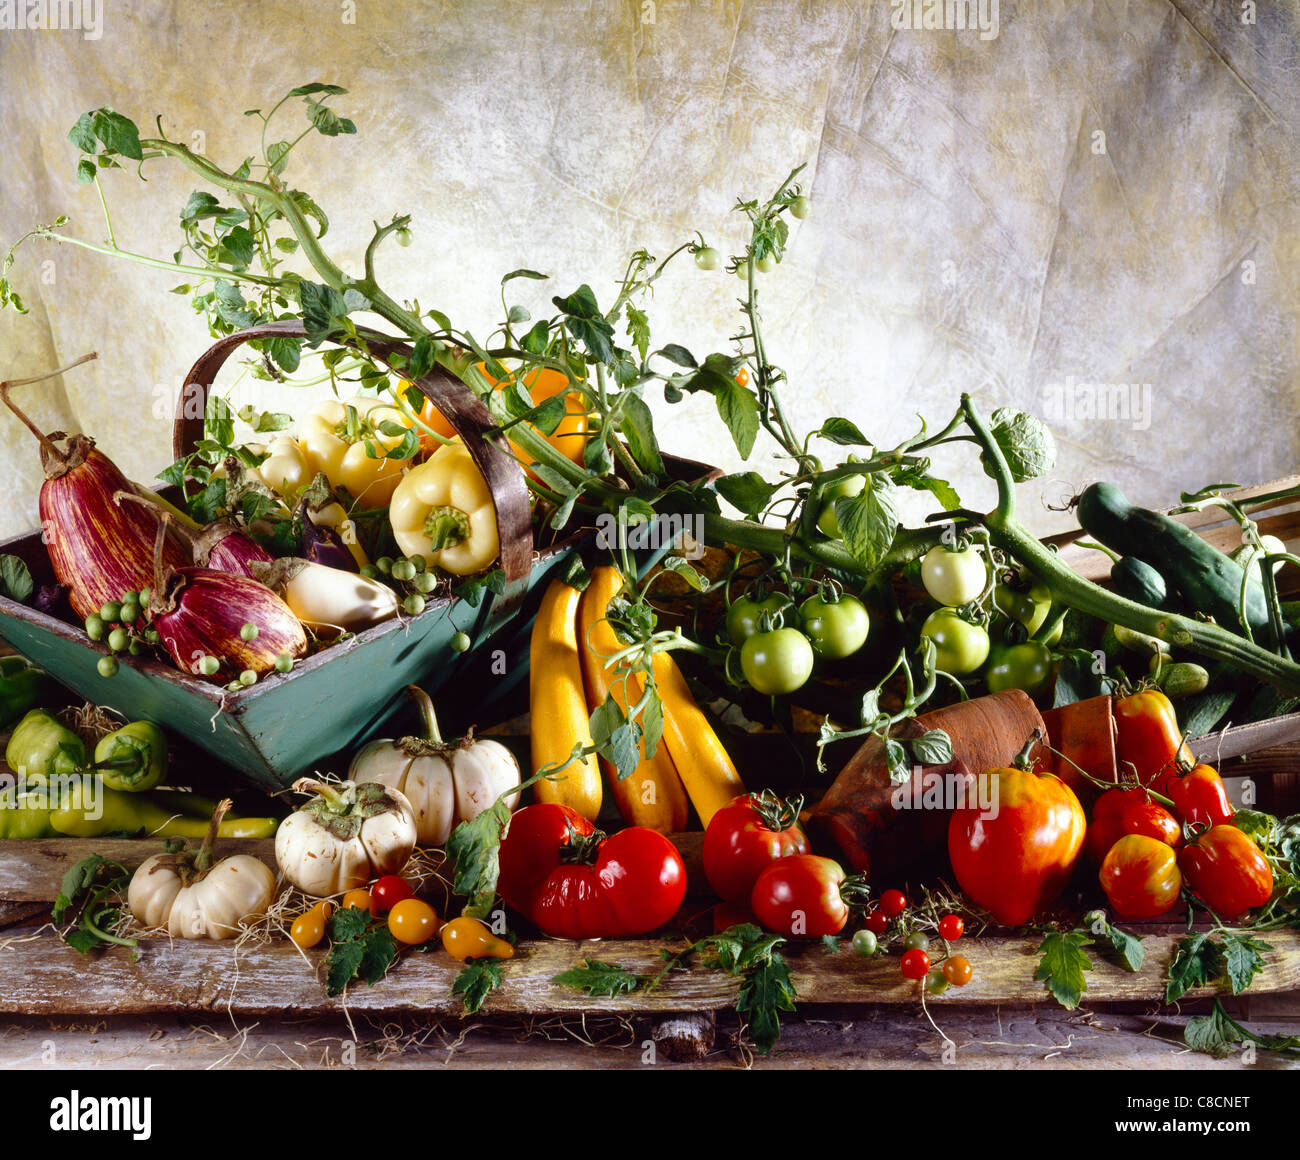 Still life of old-fashioned vegetables Stock Photo